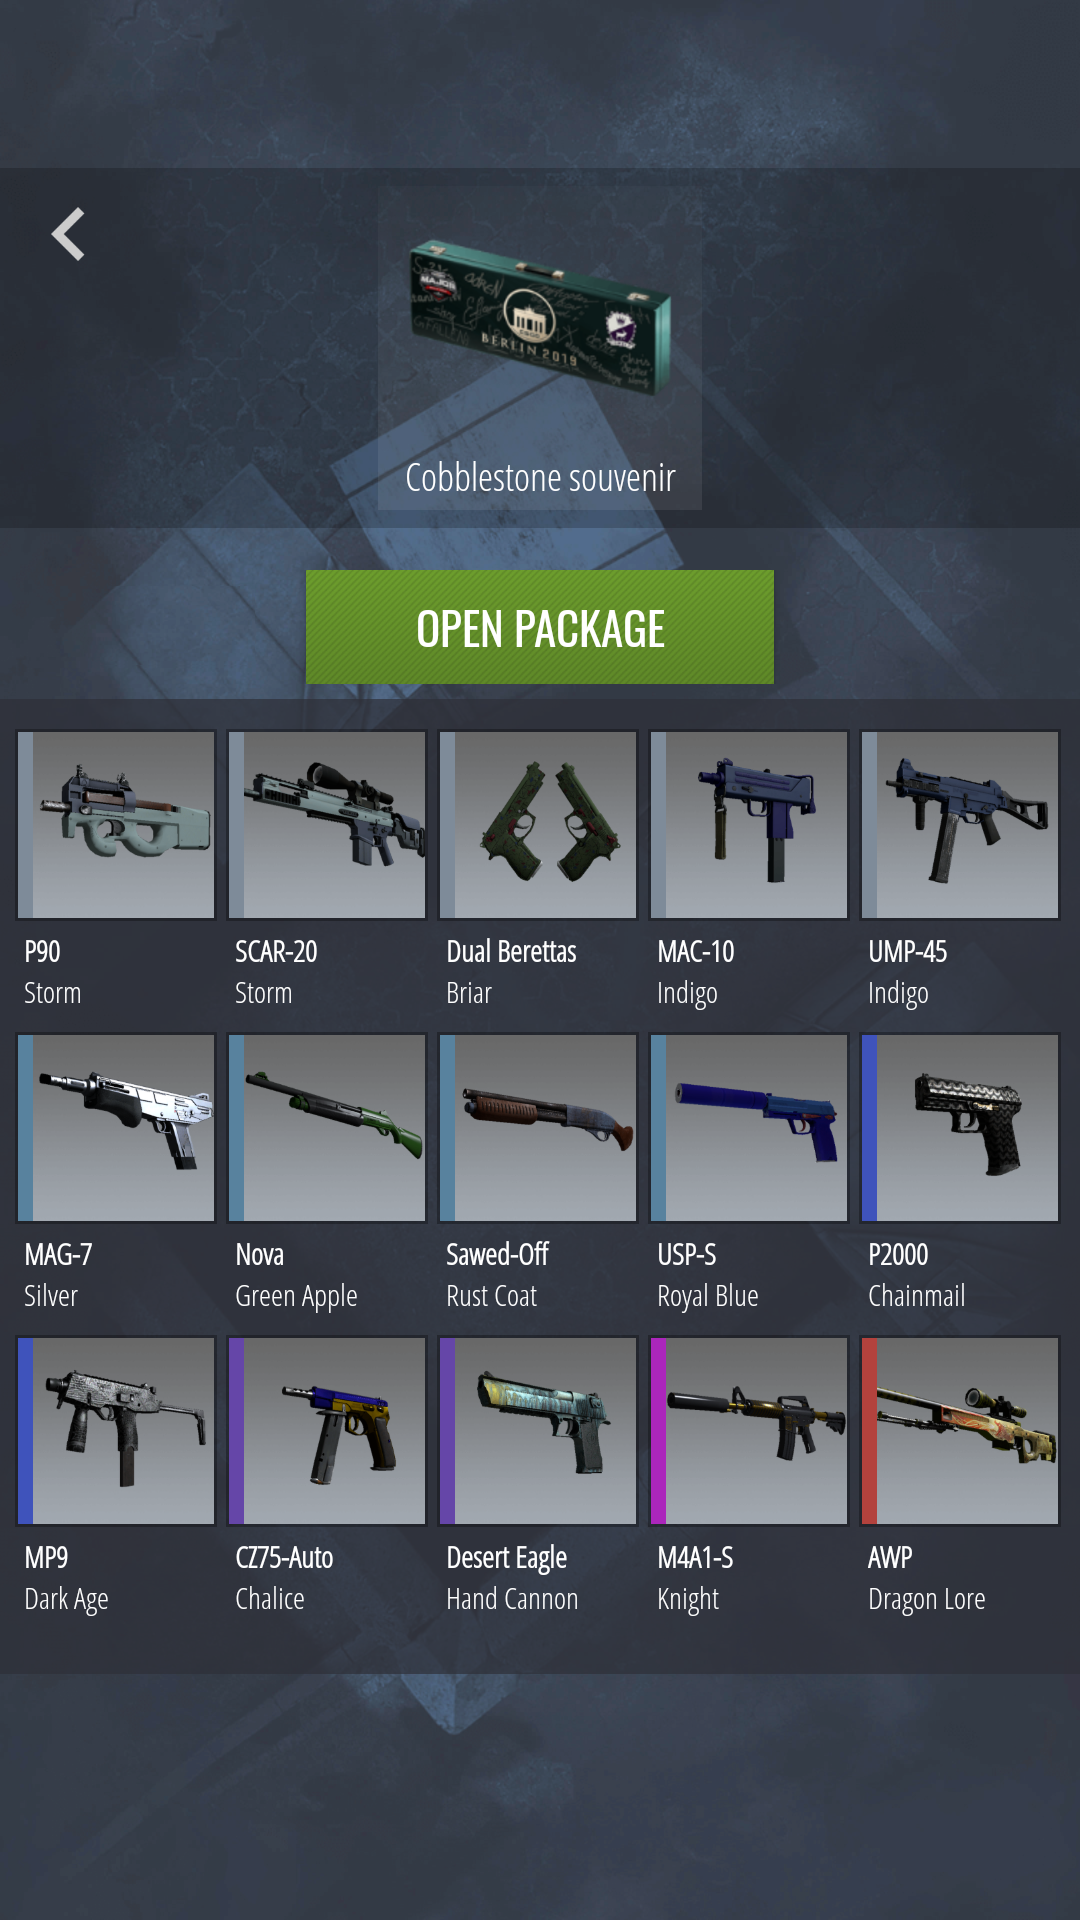 case-simulator-ultimate-cs-go-apk-11-0-for-android-download-case-simulator-ultimate-cs-go-apk